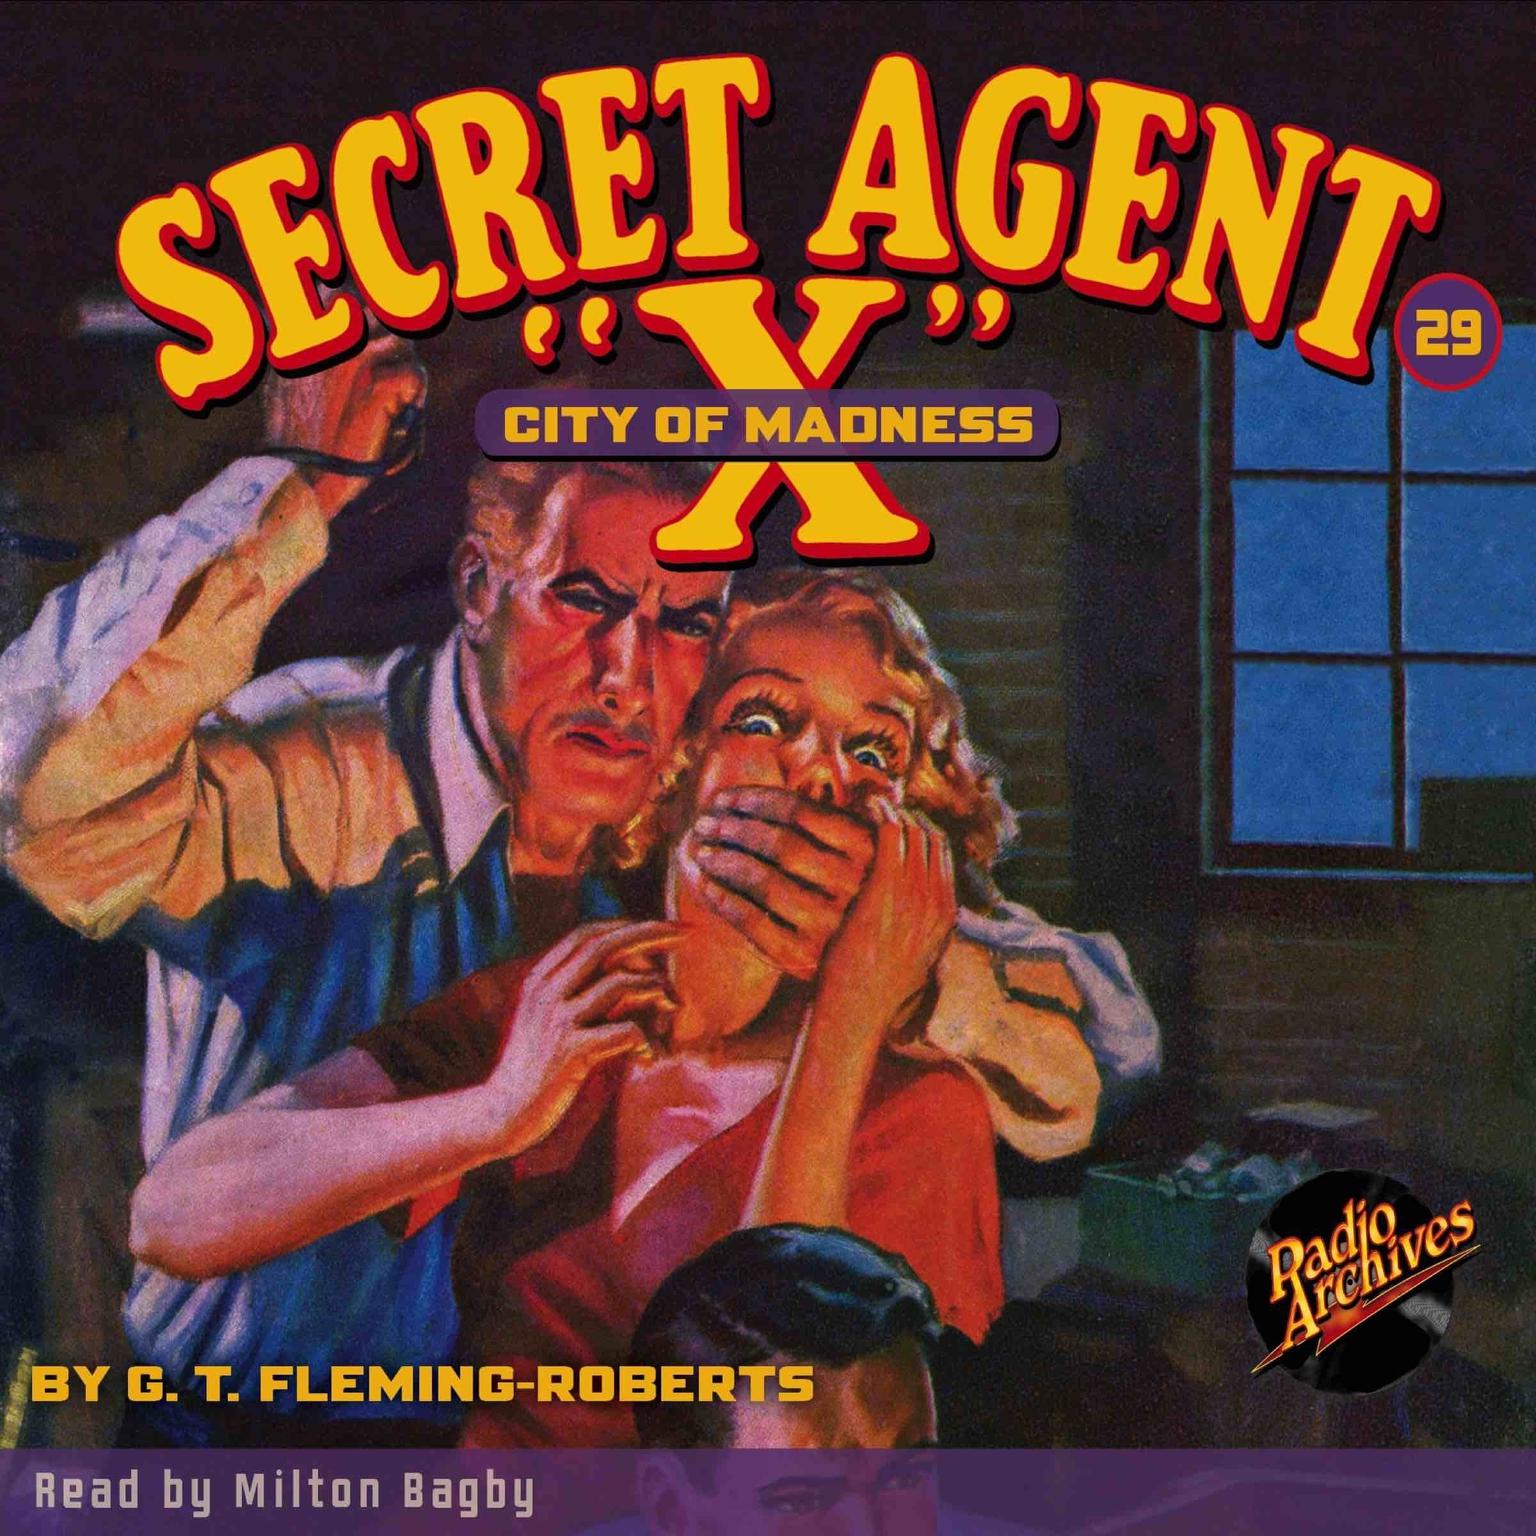 Secret Agent X: City of Madness Audiobook, by G. T. Fleming-Roberts